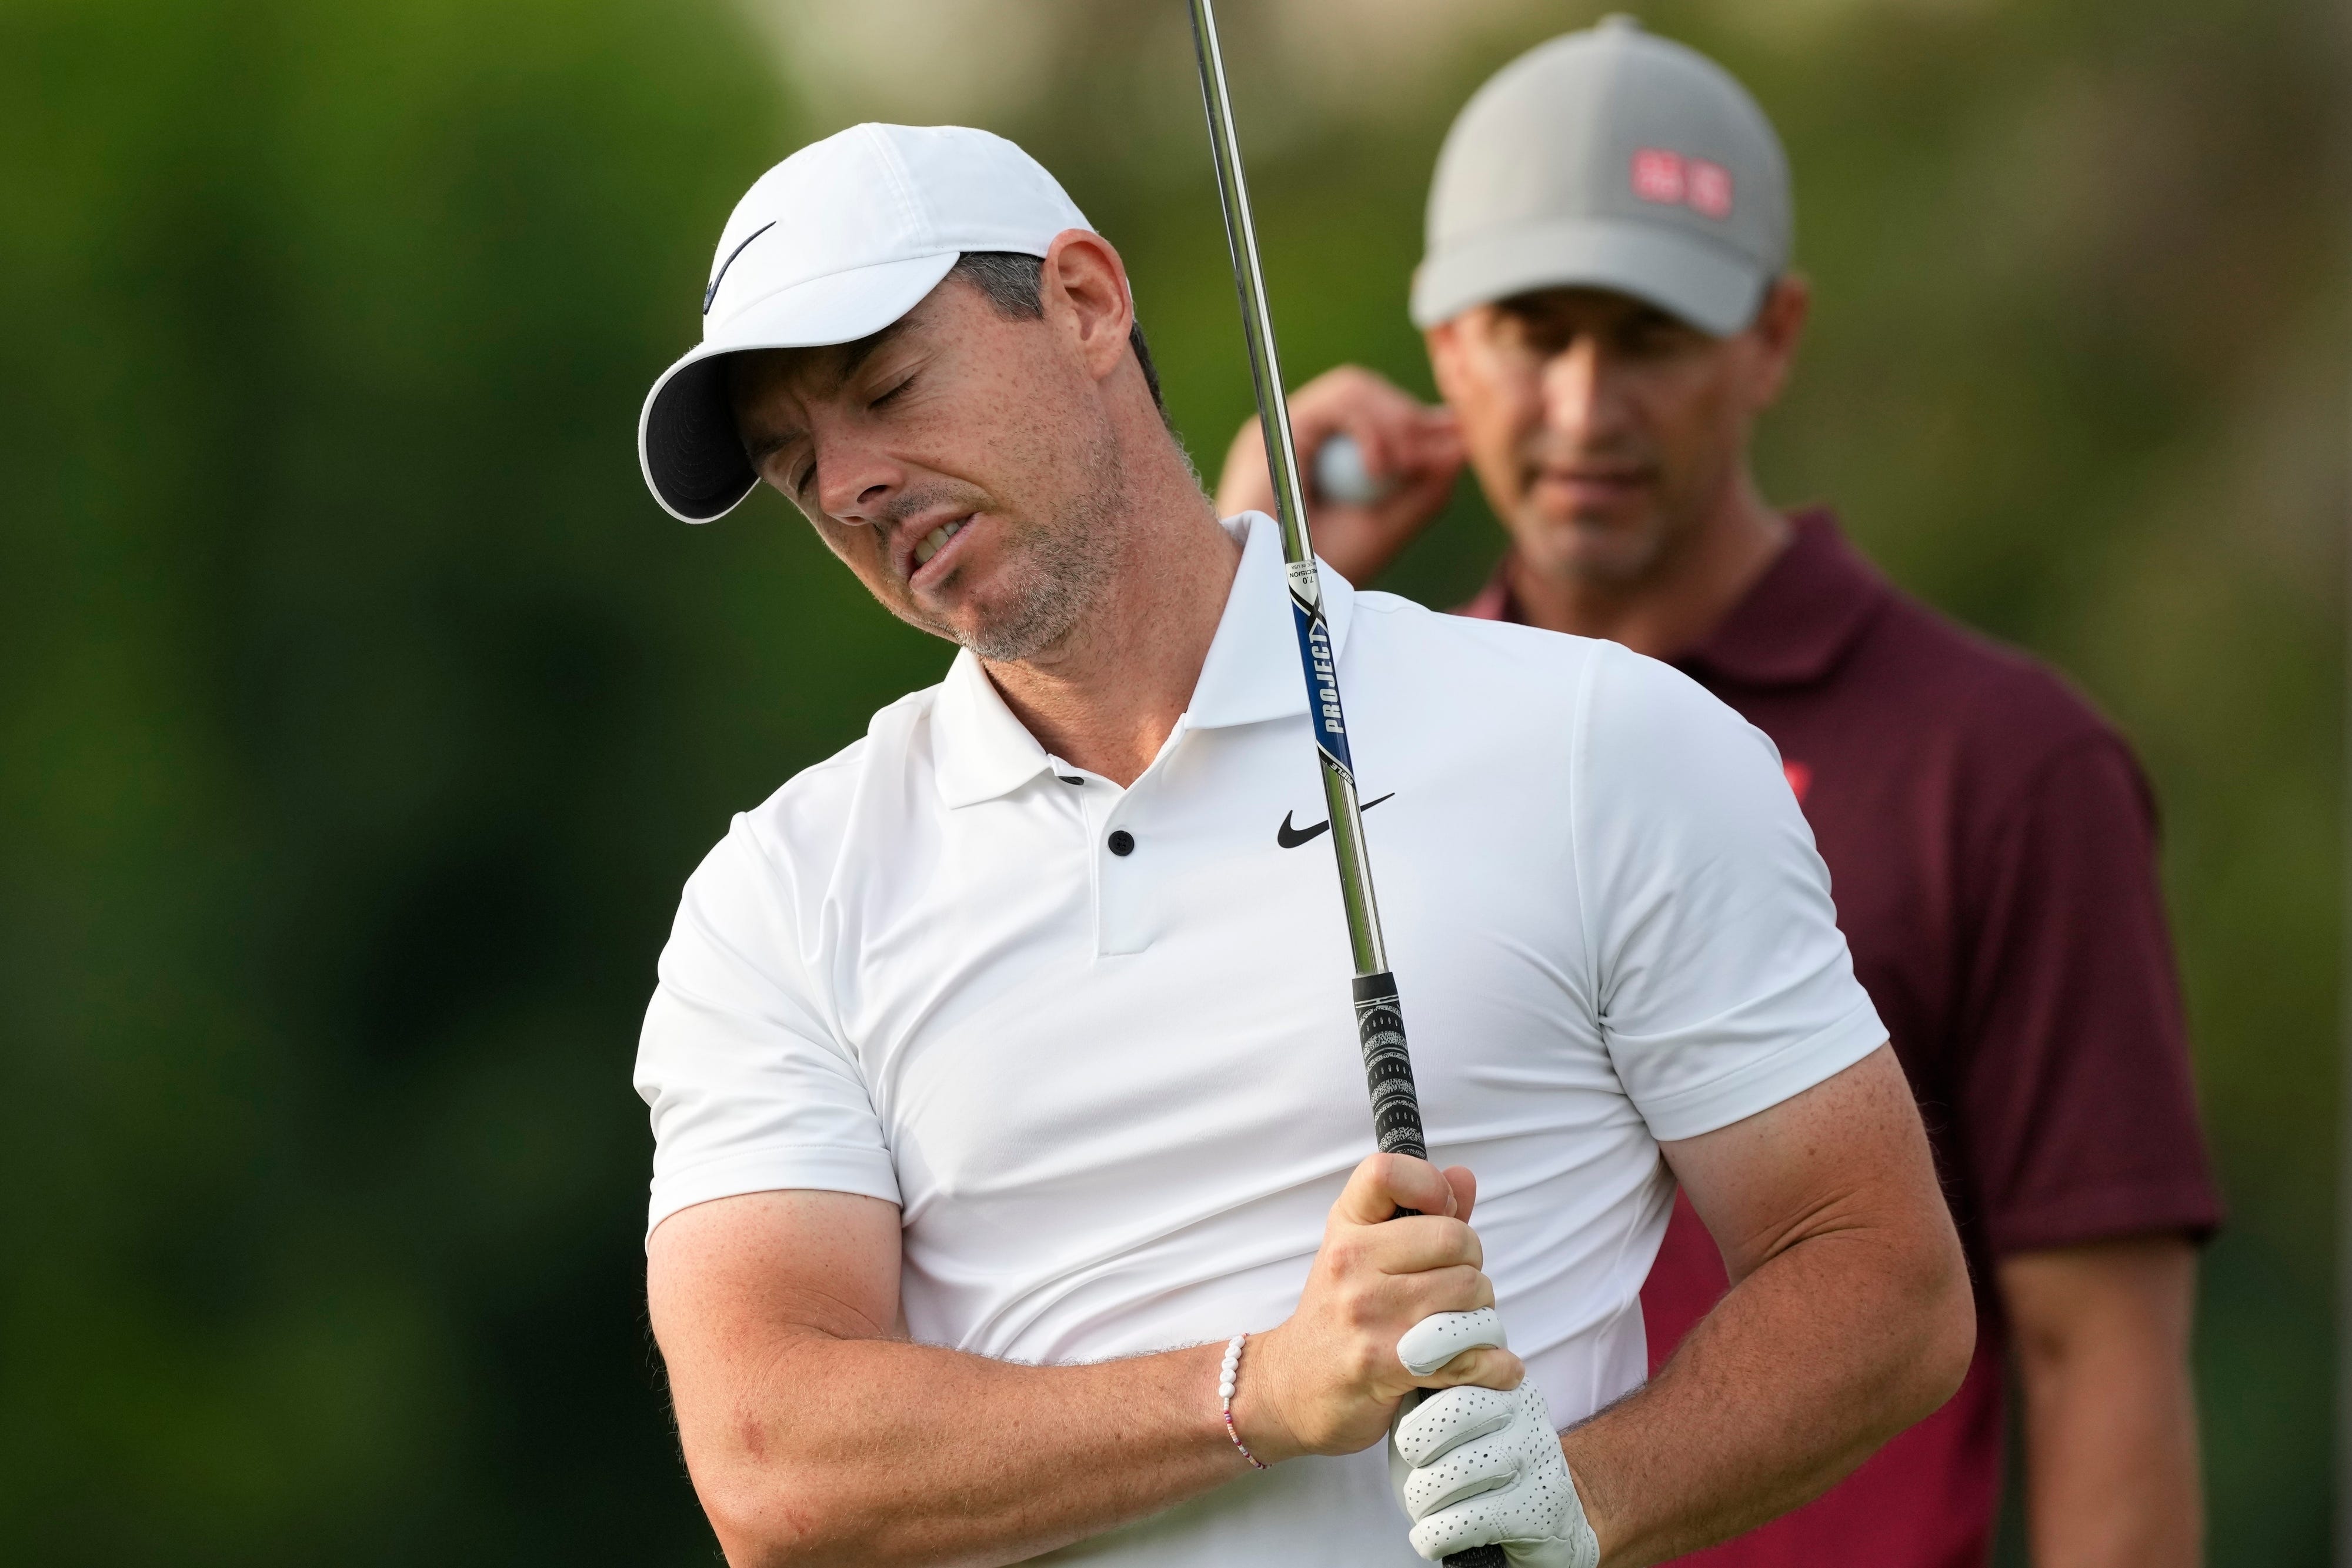 Rory McIlroy struggled towards the end of day one in Dubai